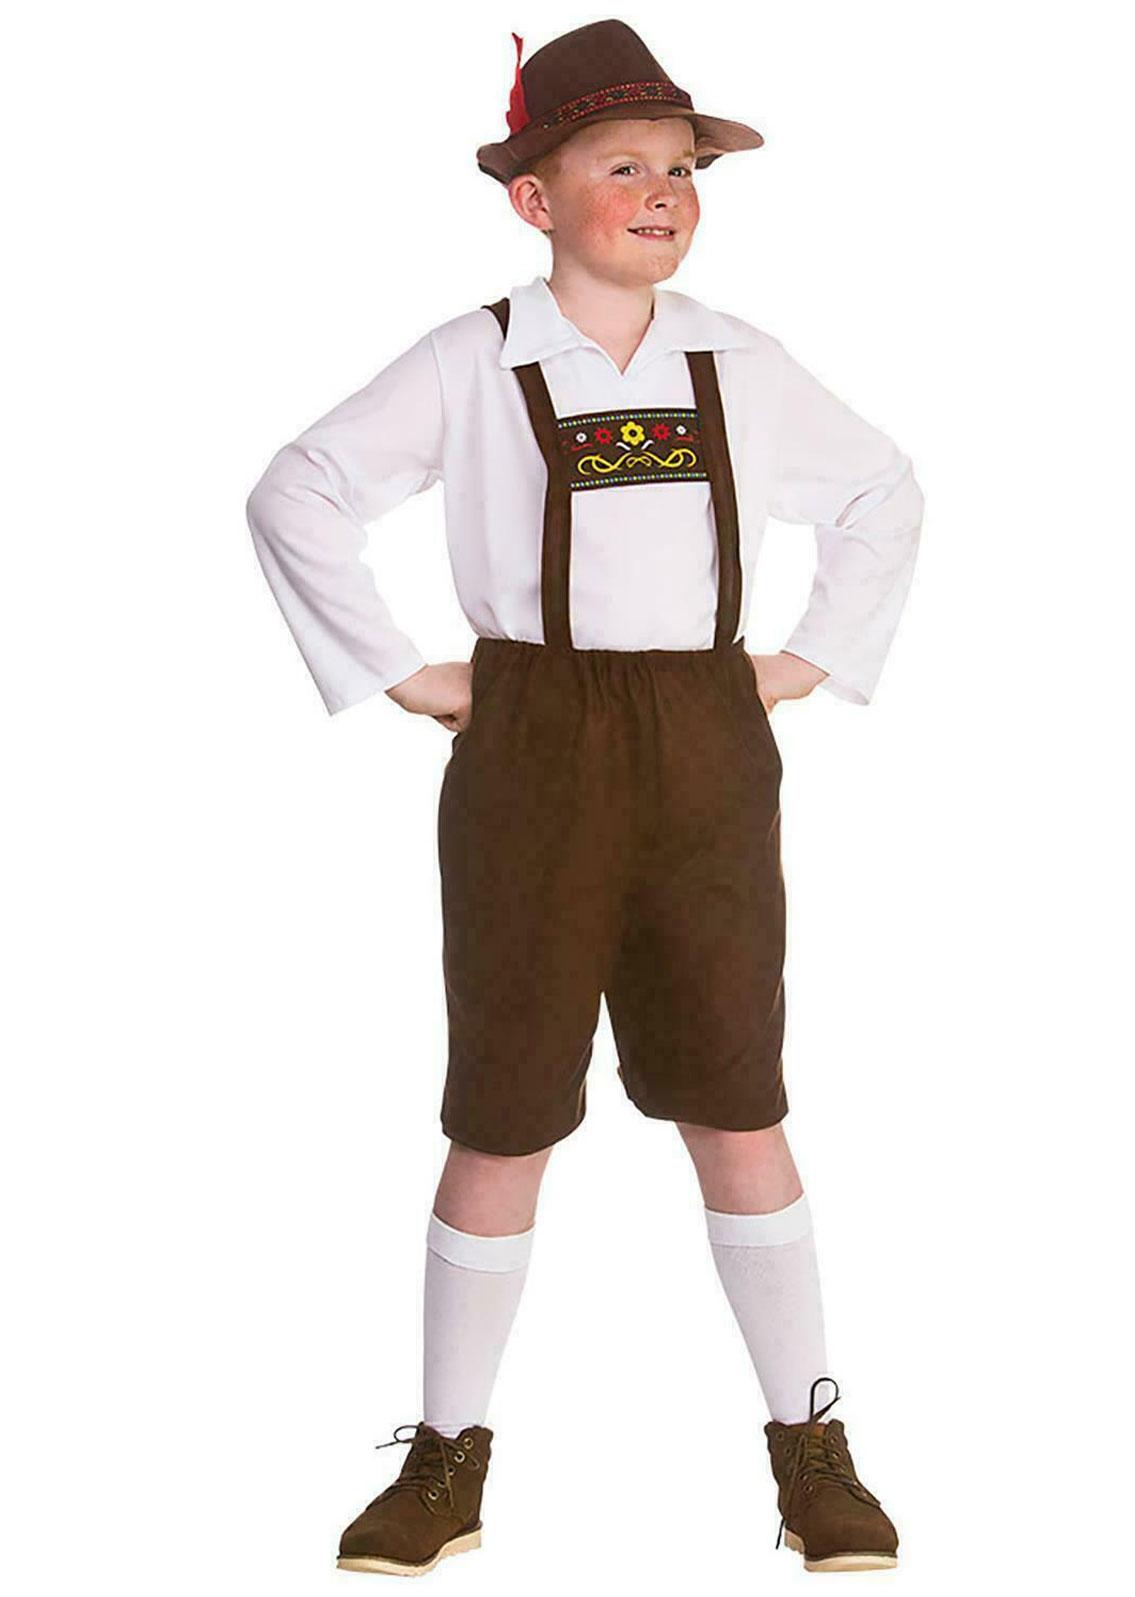 Bavarian Boy Oktoberfest Fancy Dress Costume by Wicked EB4130 available here at Karnival Costumes online party shop